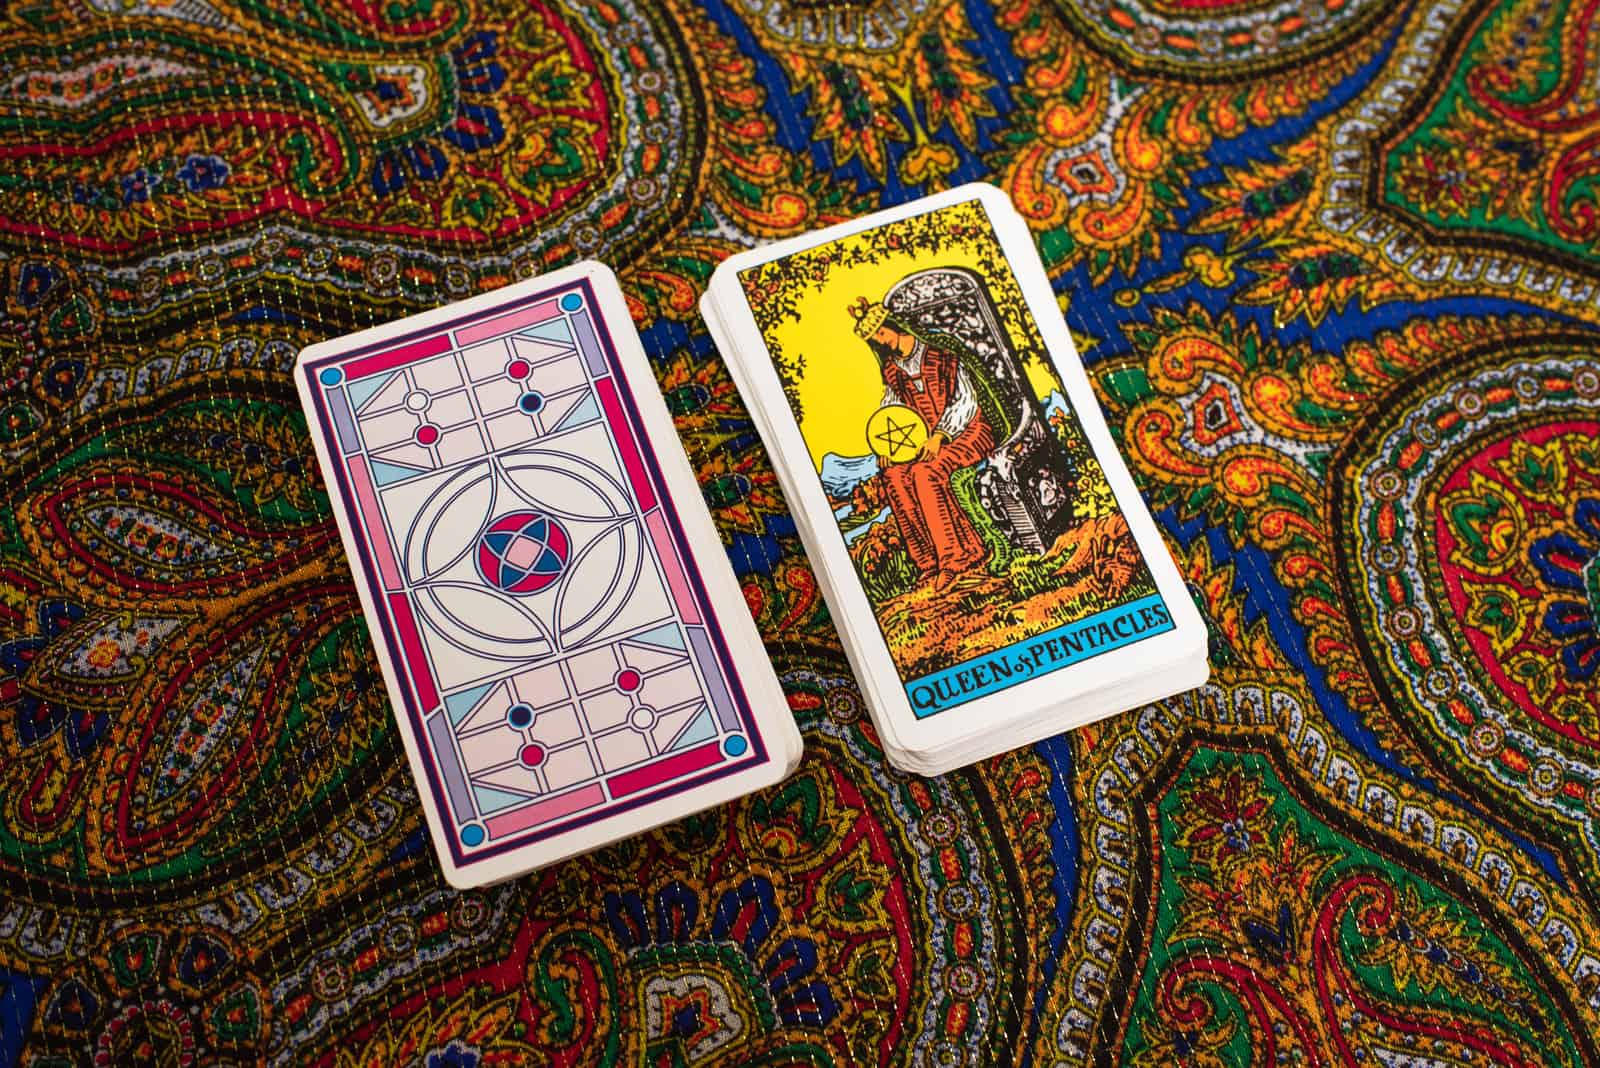 Queen Of Pentacles and deck of cards on table